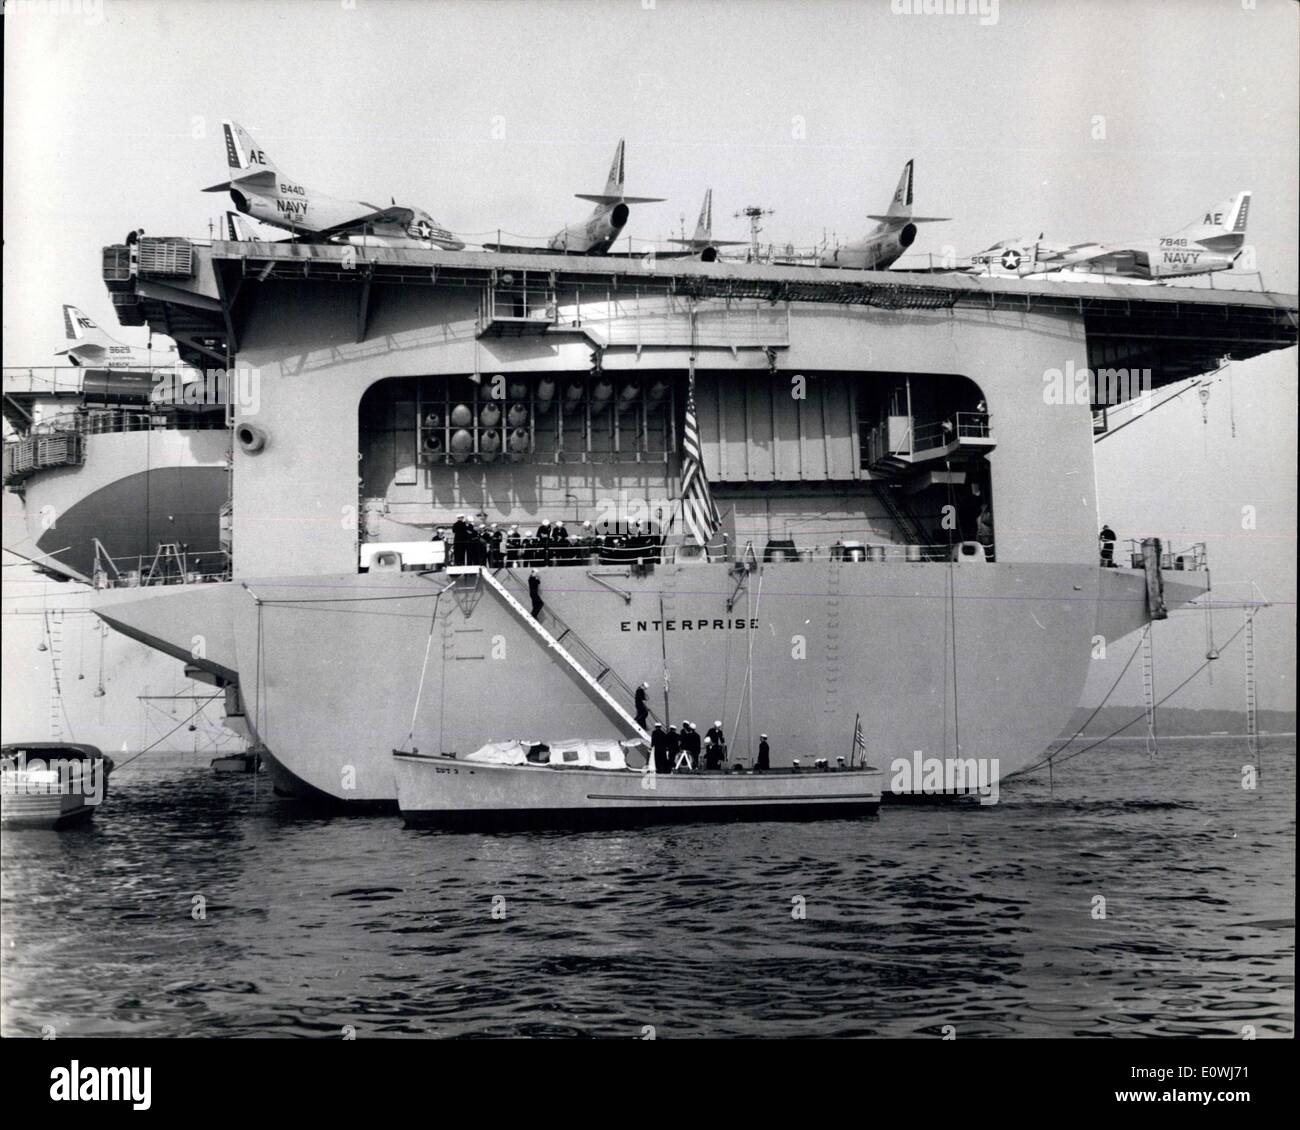 May 22, 1963 - The World's largest aircraft carrier: Currently exercising in the Mediterranean is the mighty American atom-powered aircraft carrier Enterprise. The Enterprise which is known as the ''Big-E'' is said to be large enough to carry both the Queen Elizabeth and the Queen Mary liners side by side on her flight deck. She carries 100 jet fighters and bombers, has a crew of nearly 5,000 has 20 decks and has cost ?150,000,000 to build. Photo shows view of the after end of the huge carrier said to be the largest vessel a float. Stock Photo